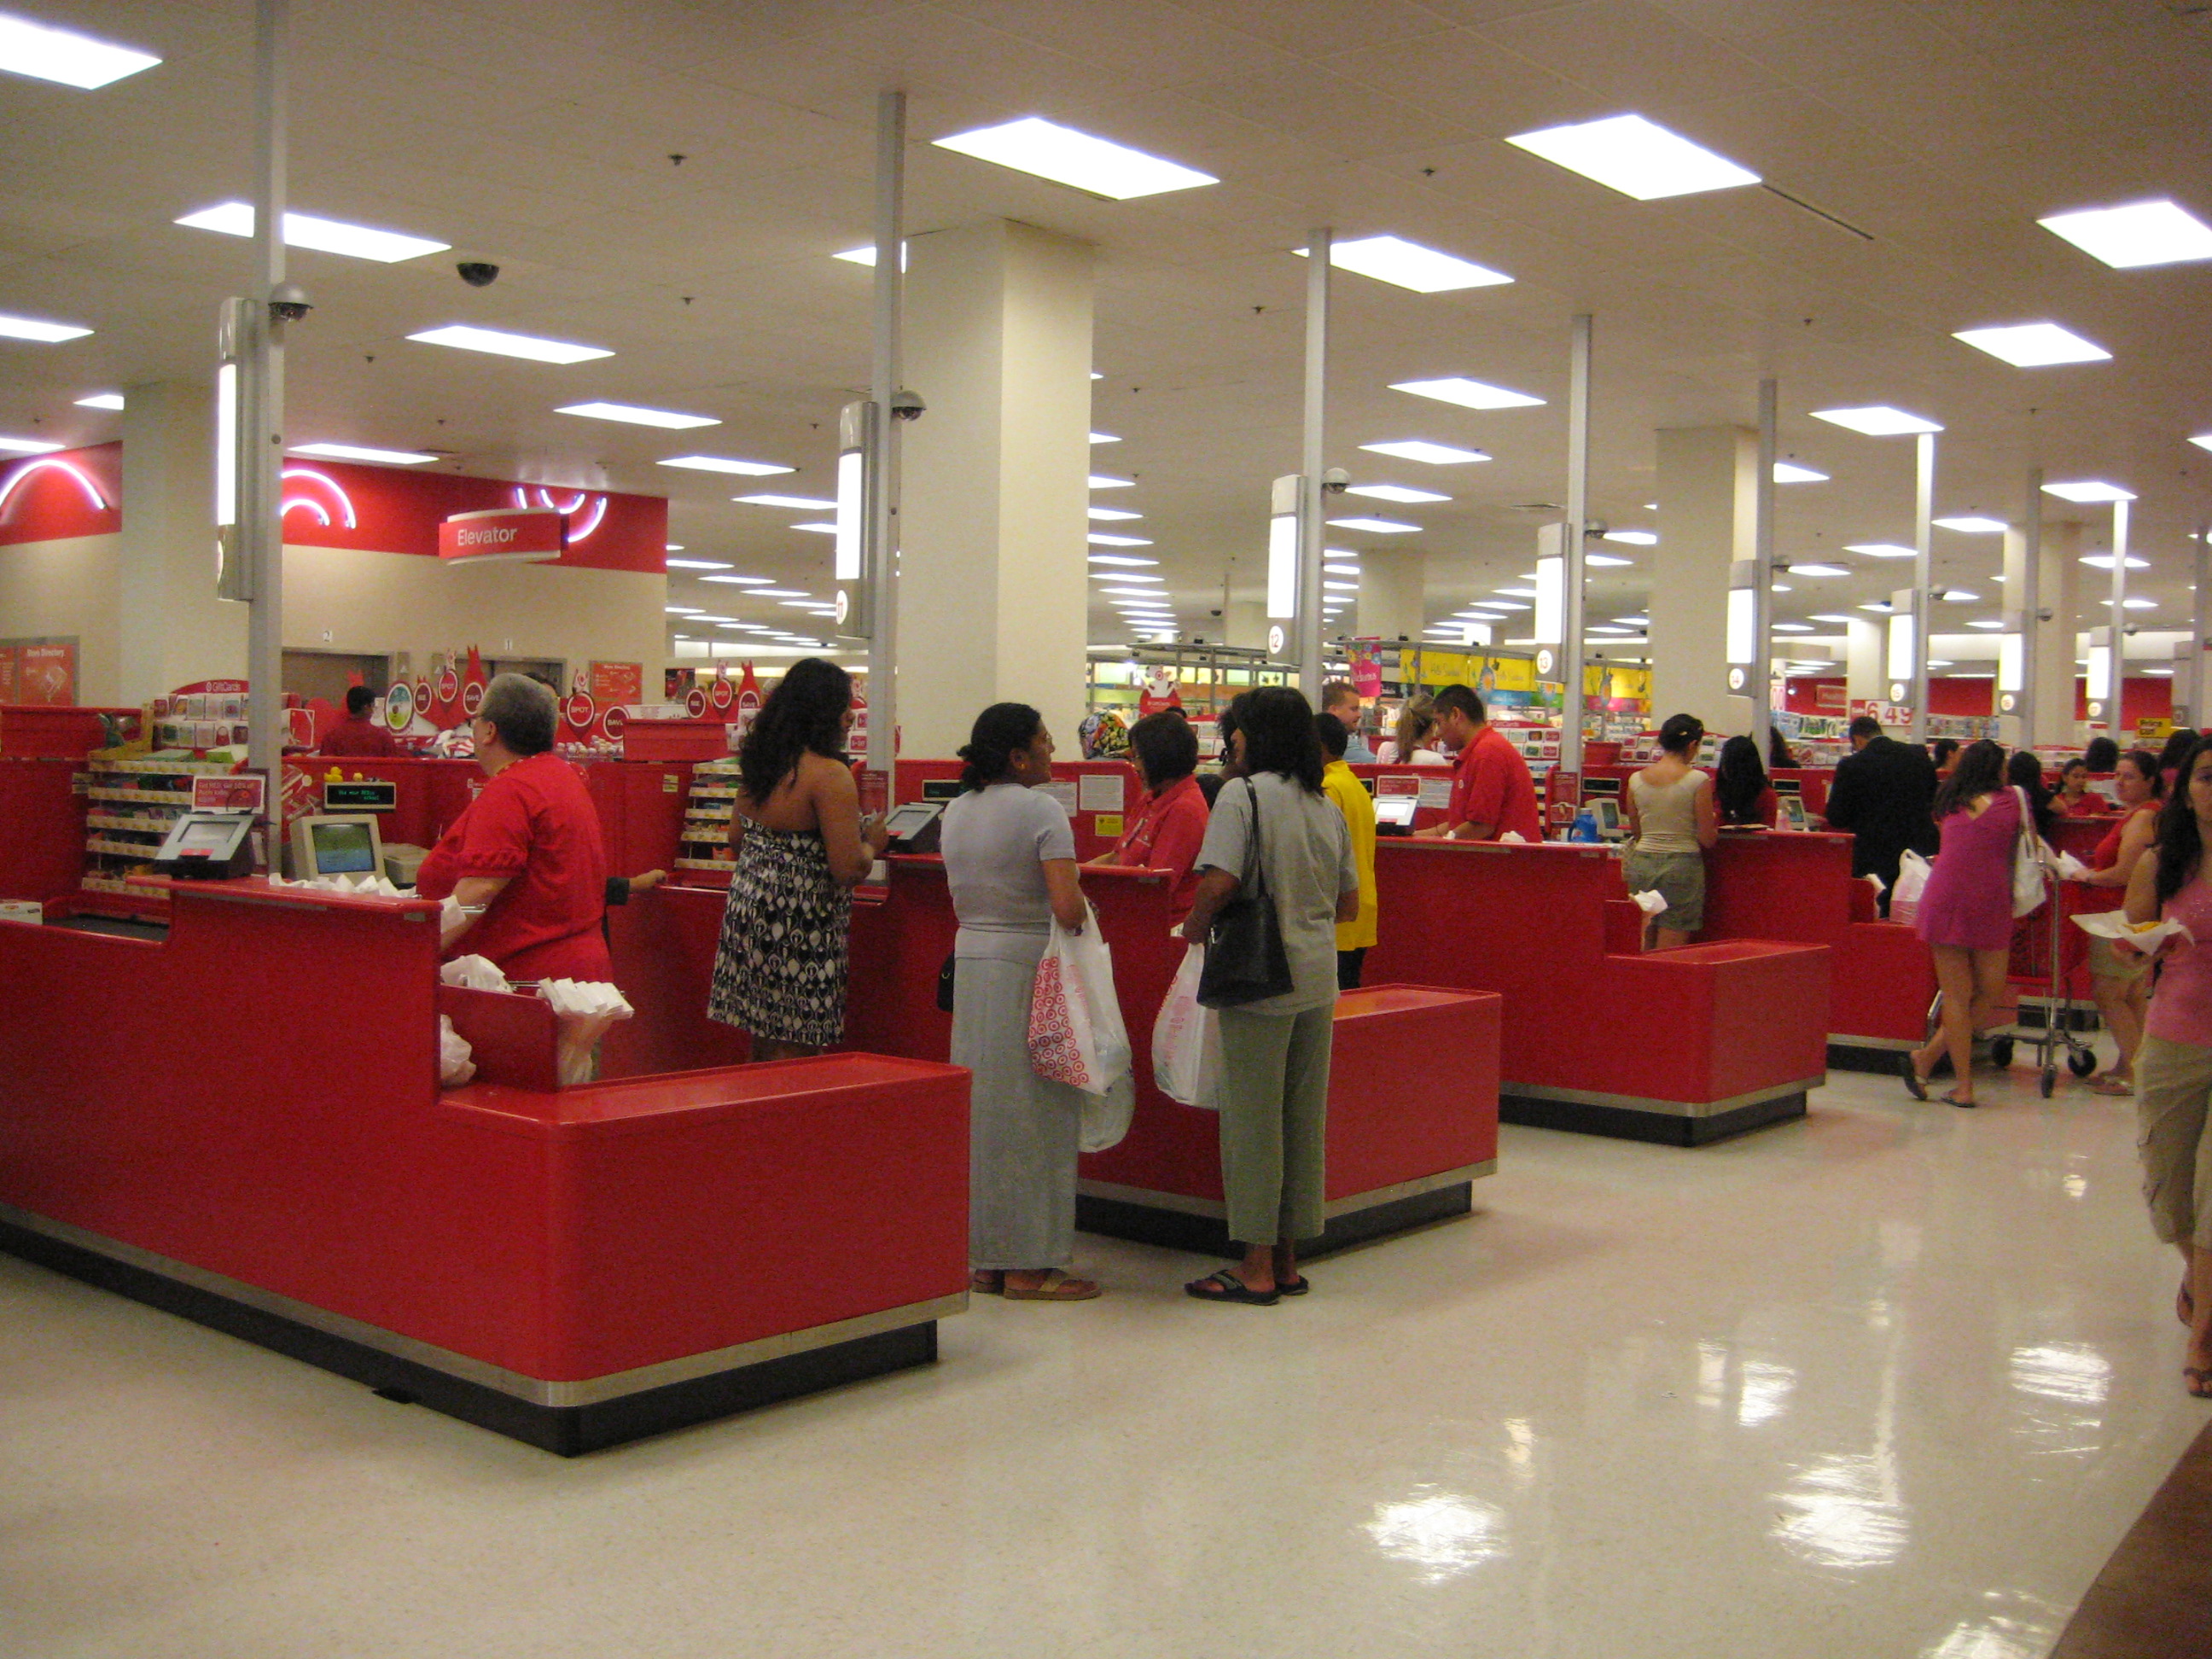 June Retail Sales Slide as Consumers Continue to Worry About Economy, According to NRF